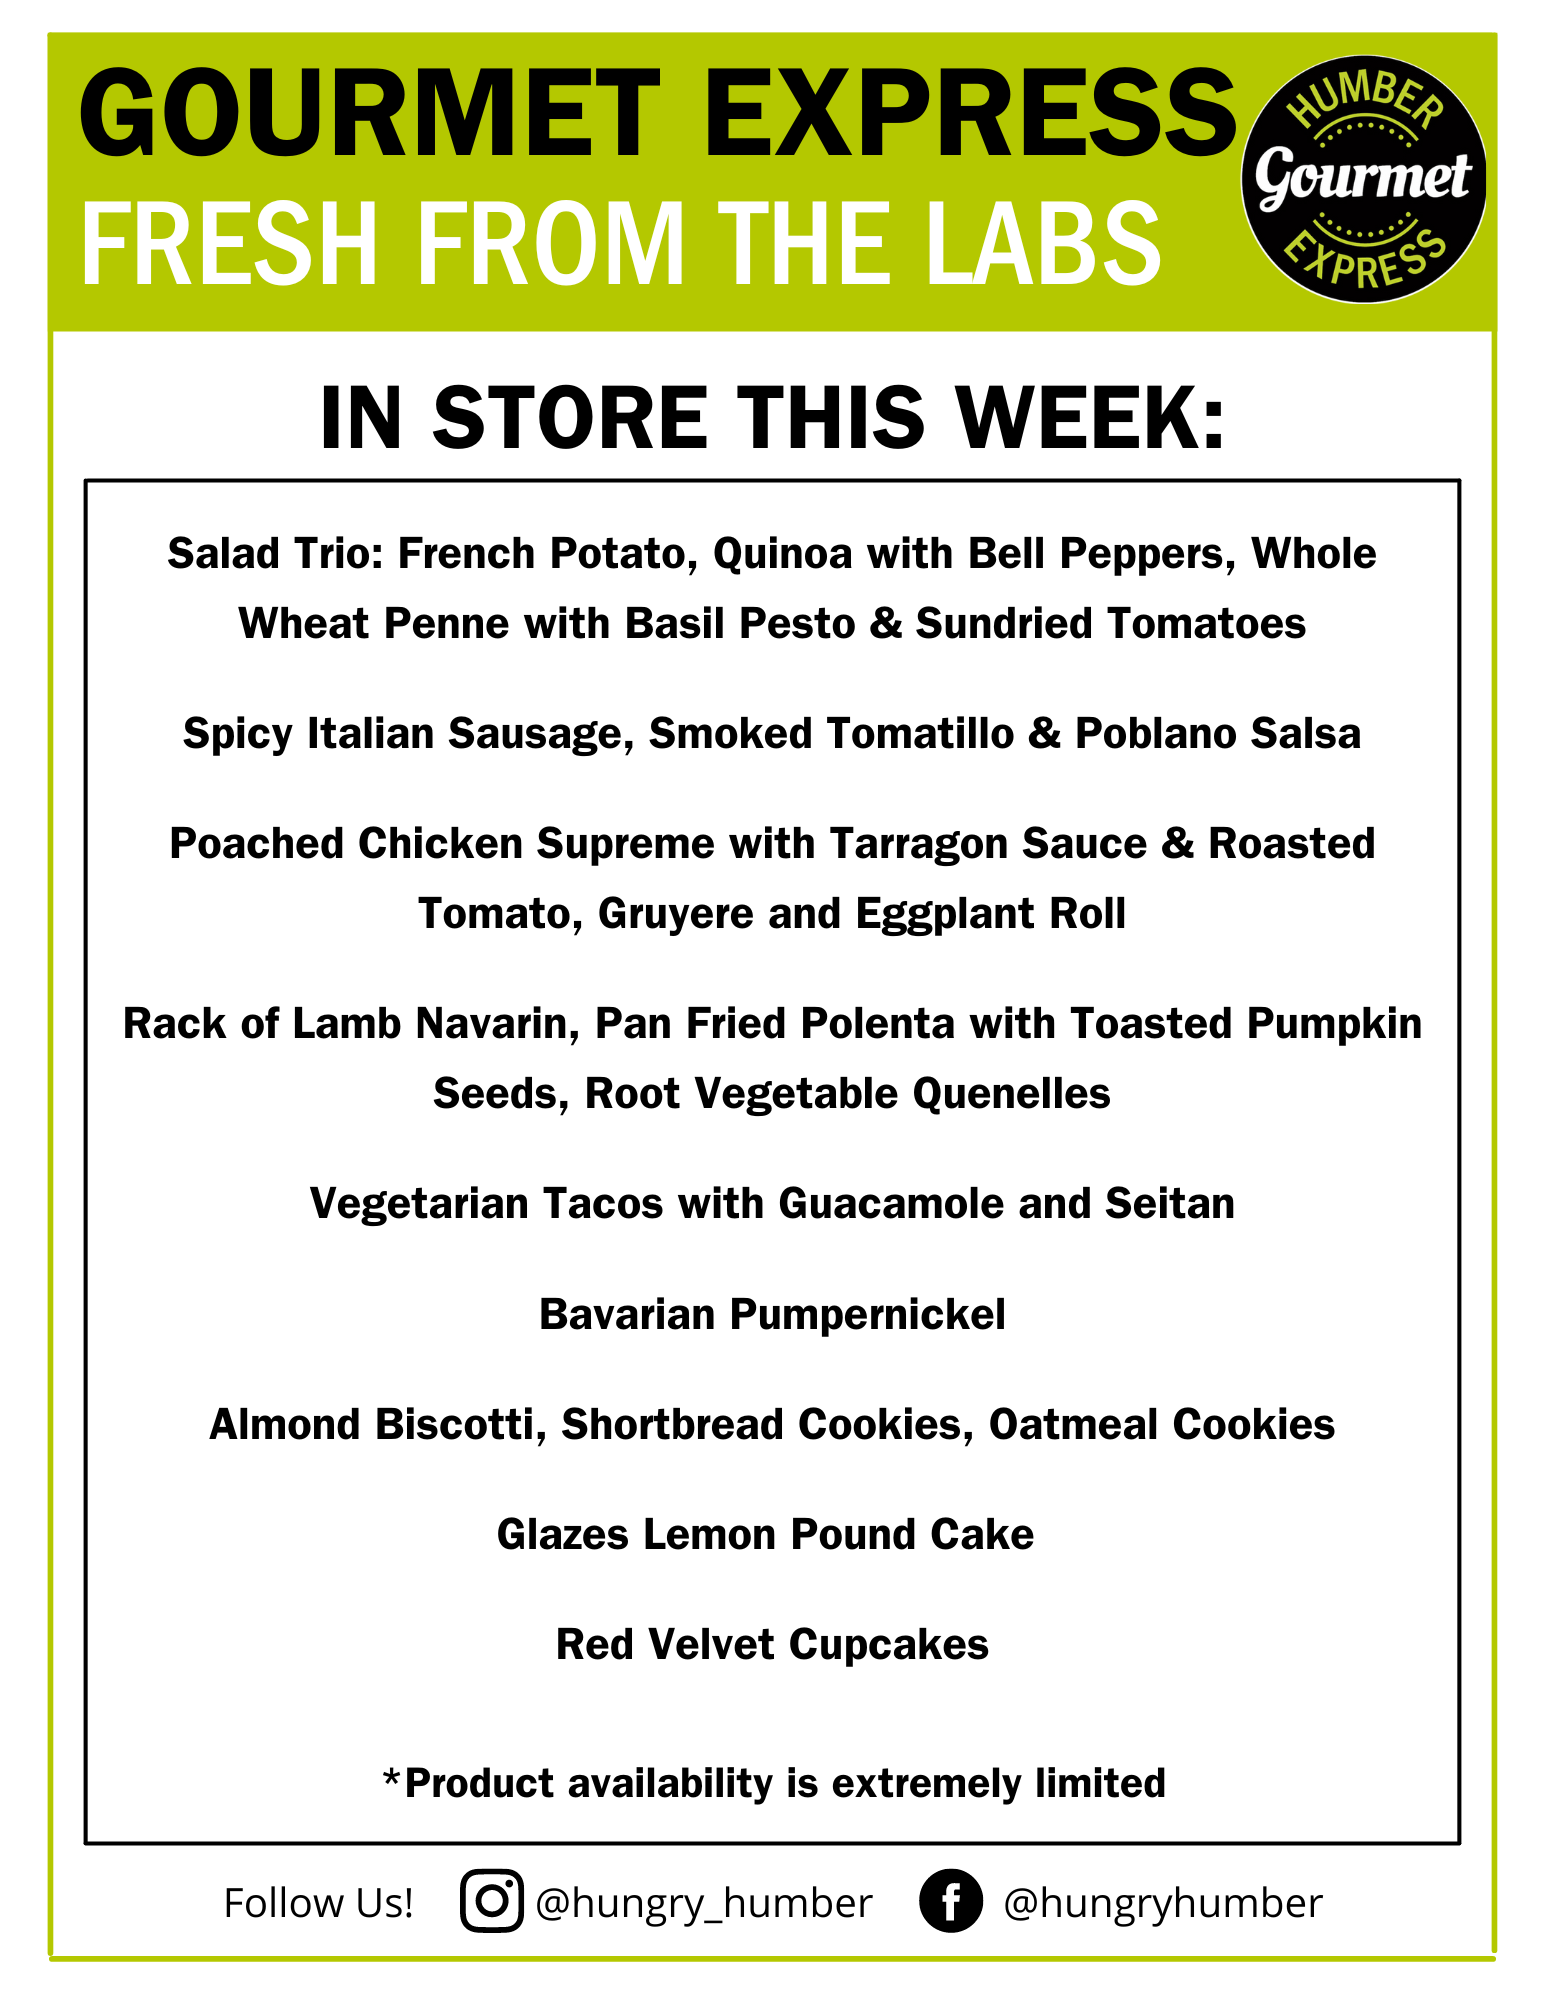 List of items available in Gourmet Express this week 